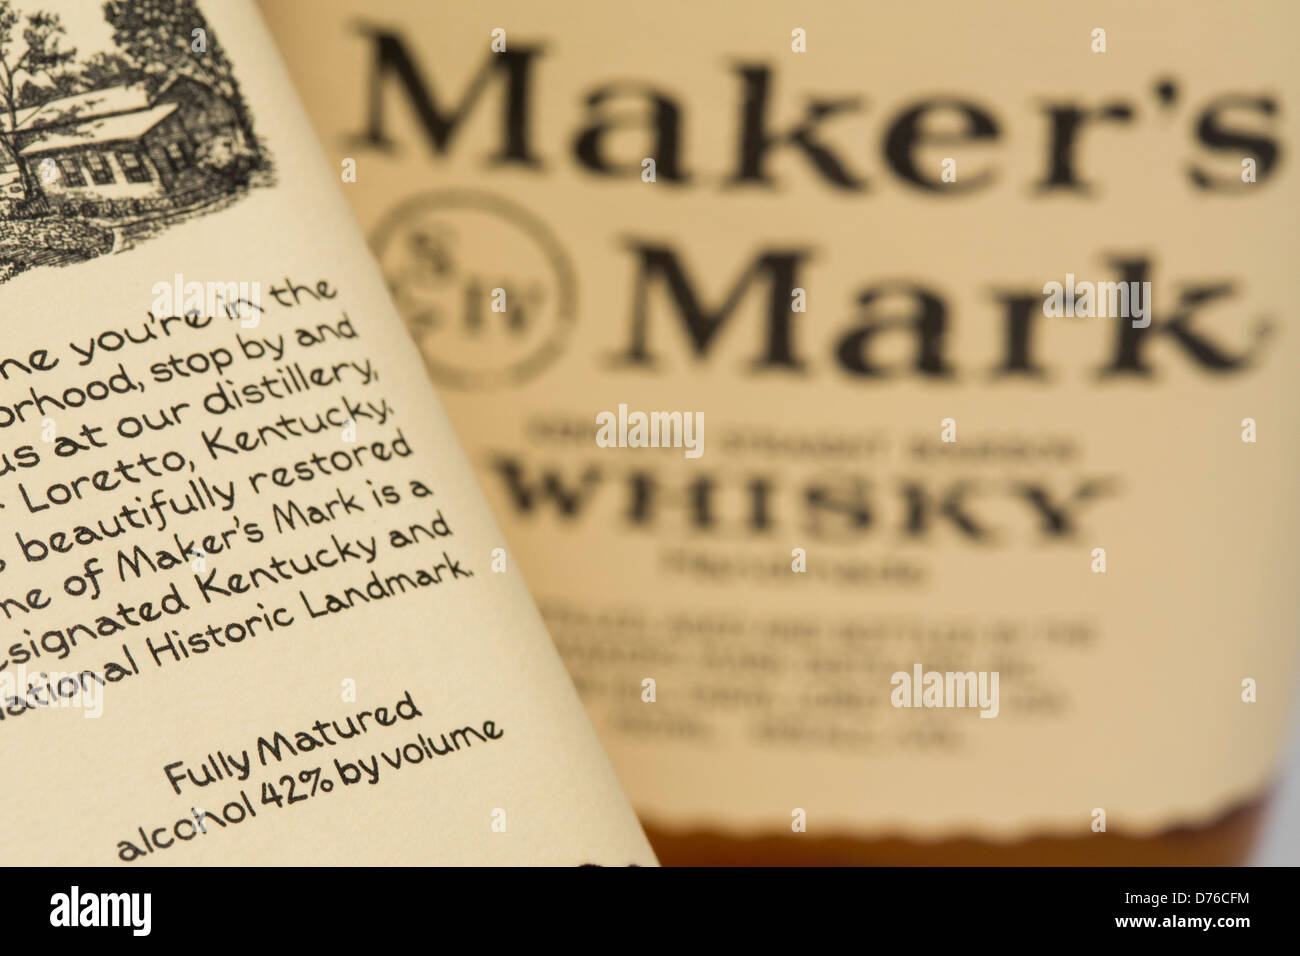 Maker's Mark Whiskey that has been watered down to 42% (84 proof) alcohol by volume from its original 45% (90 proof) alcohol. Stock Photo